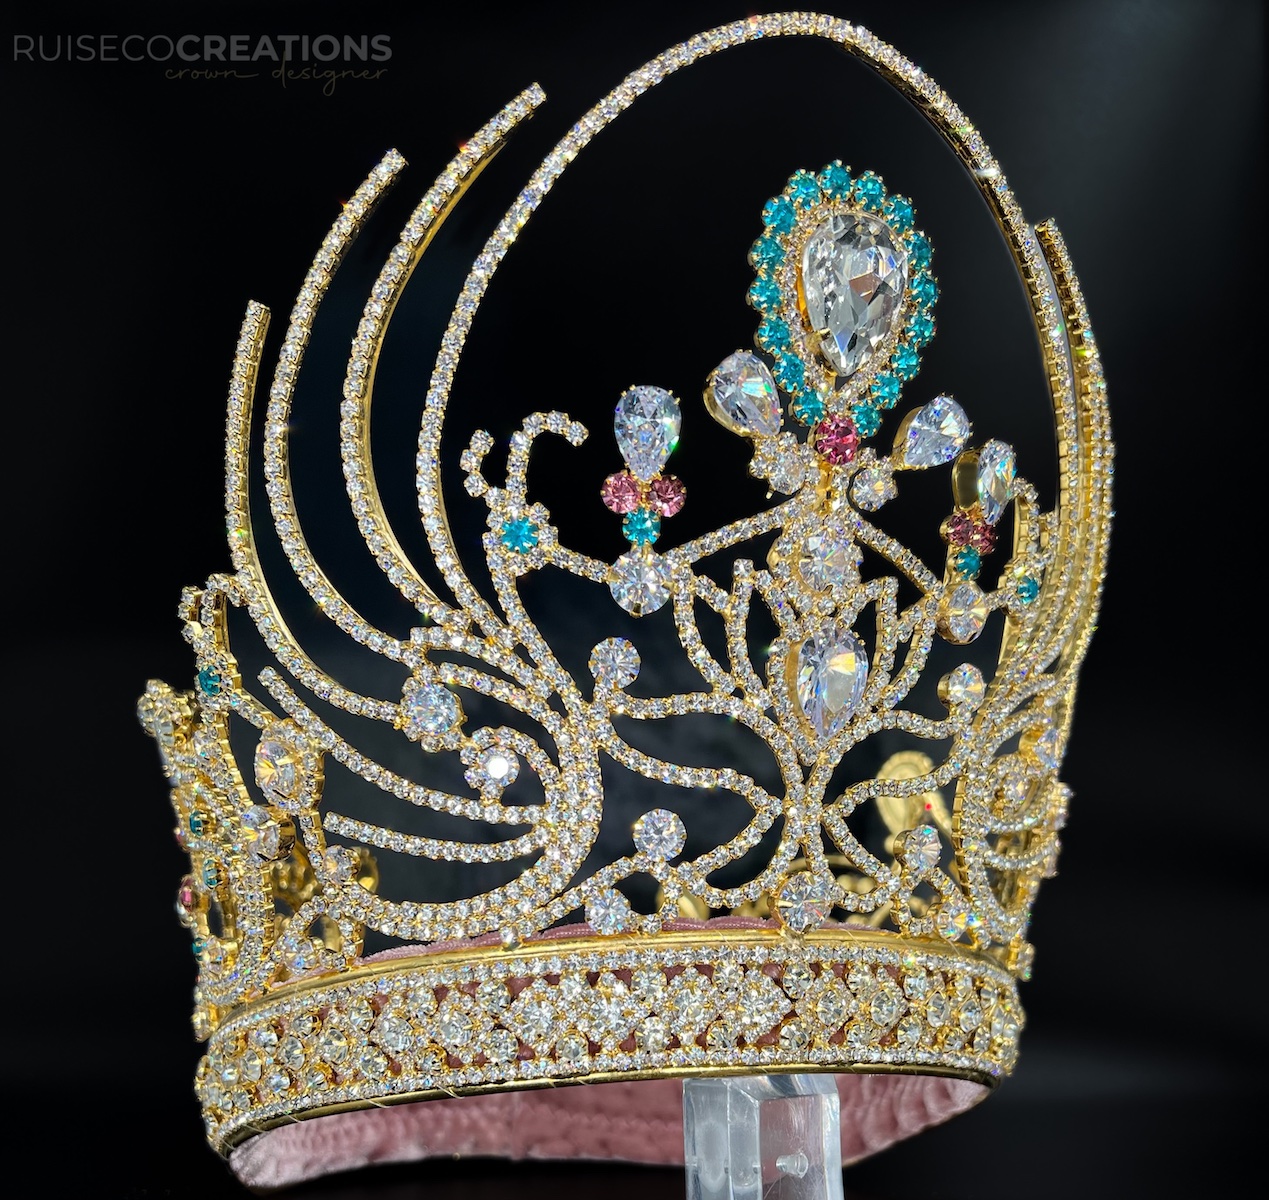 The new version of the Empowered Queen Crown